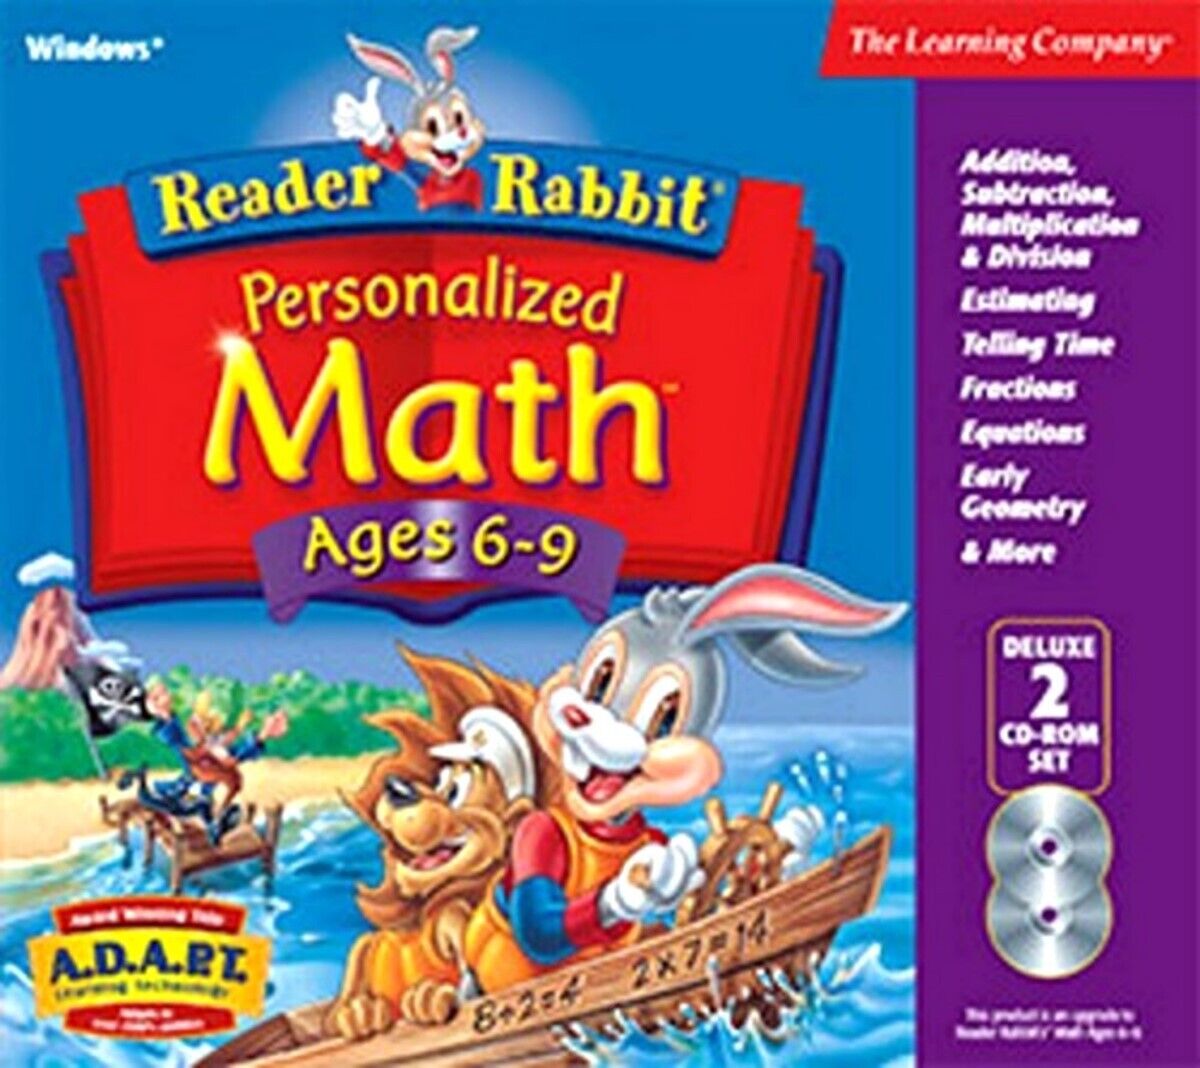 Reader Rabbit Personalized Math 6 - 9 ADAPT Deluxe 2-CD Set PC Software 32-bit